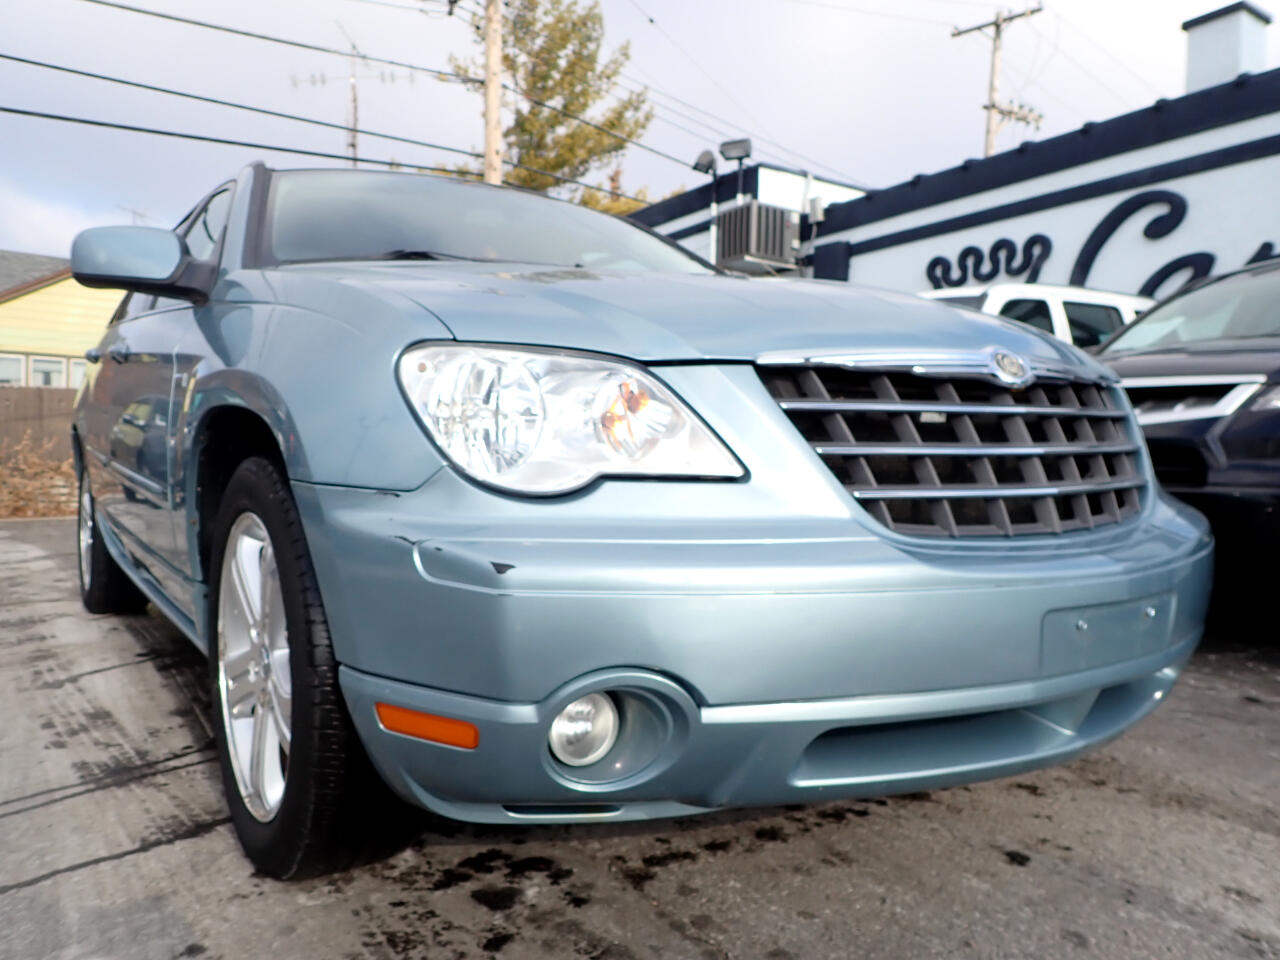 Chrysler Pacifica 4dr Wgn Touring AWD 2008